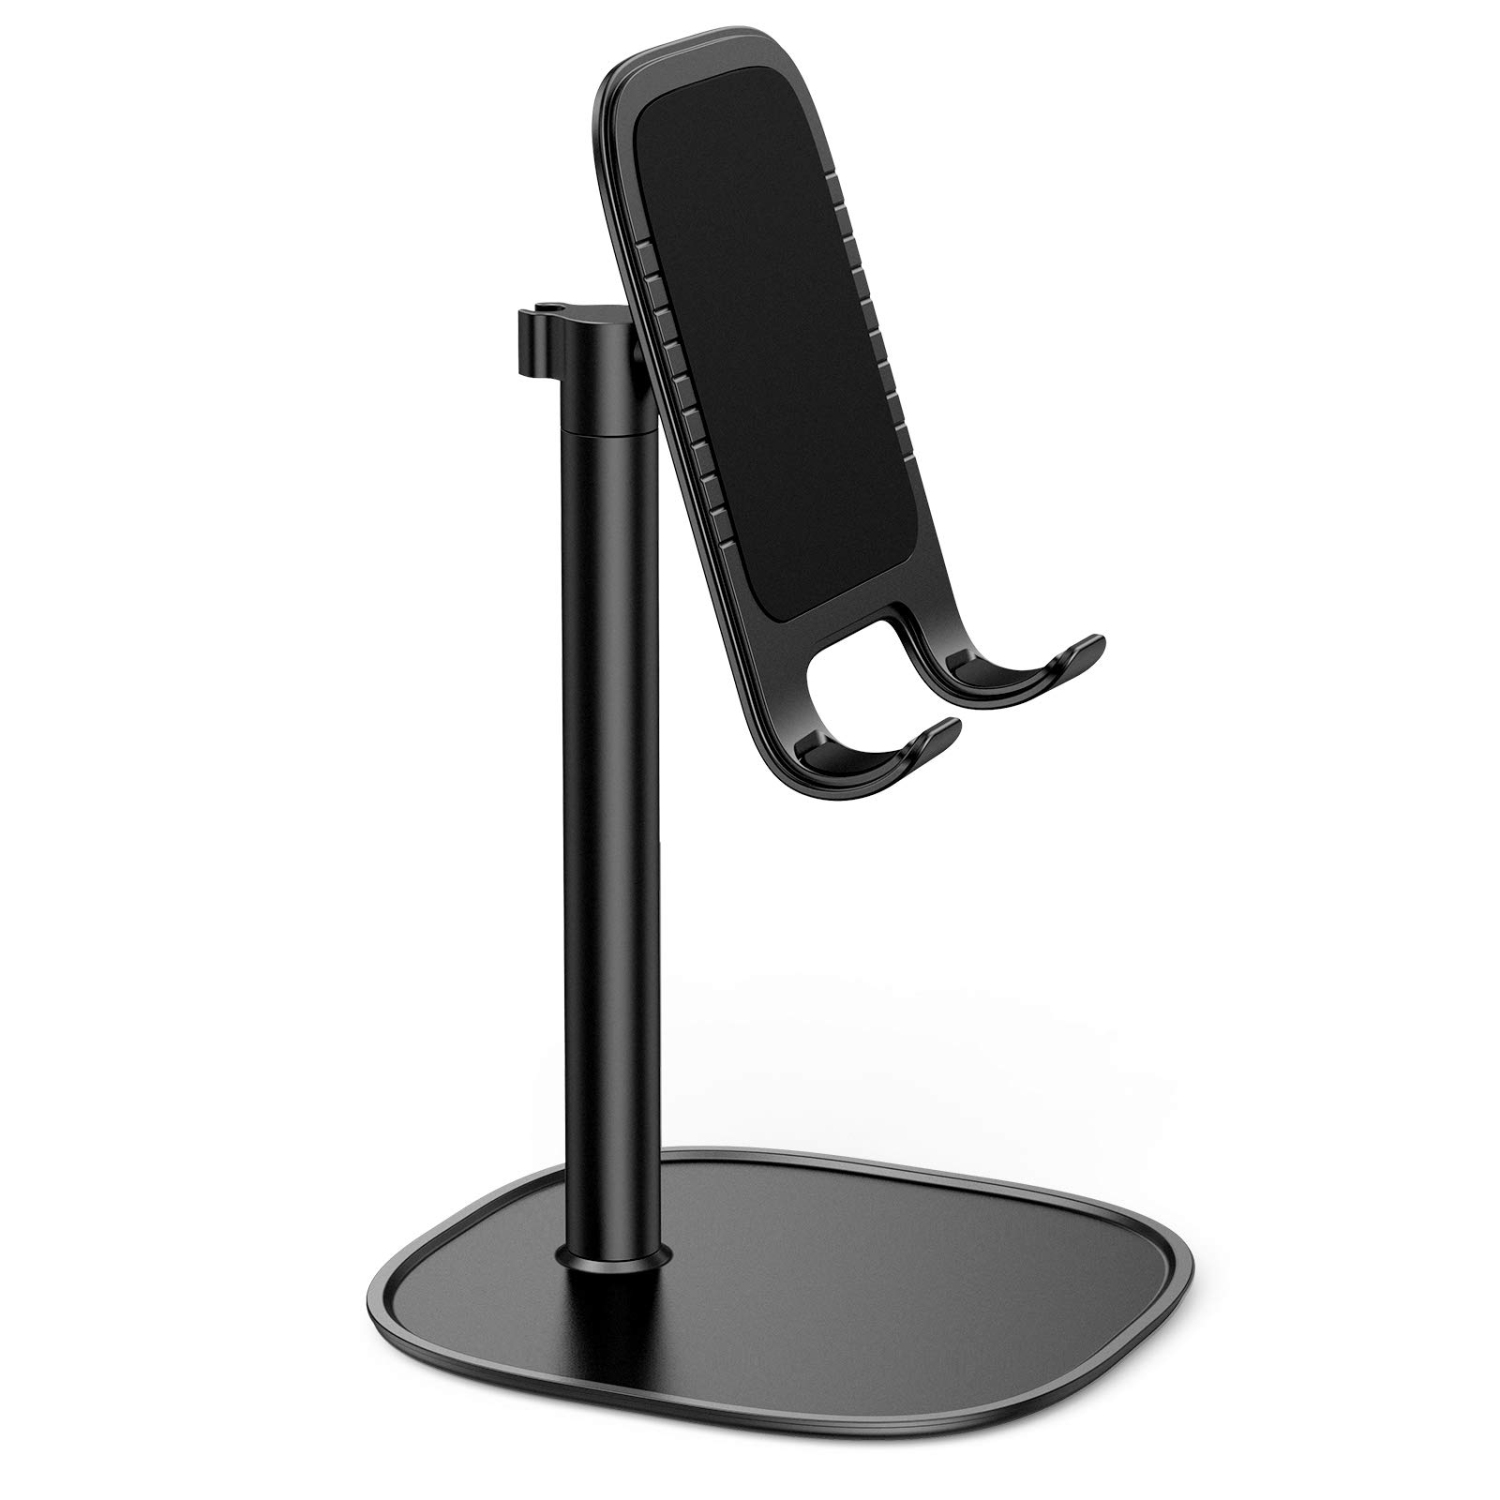 Cell Phone Stand Desk Holder Compatible for iPhone 14 13 12 Pro Max 11 SE XS XR 8 Plus 6 7, Samsung Galaxy S22 S21 S20 S10 S9 S8 Note 9 8 S7 S6, Google Pixel 4 XL, Smartphone Adjus